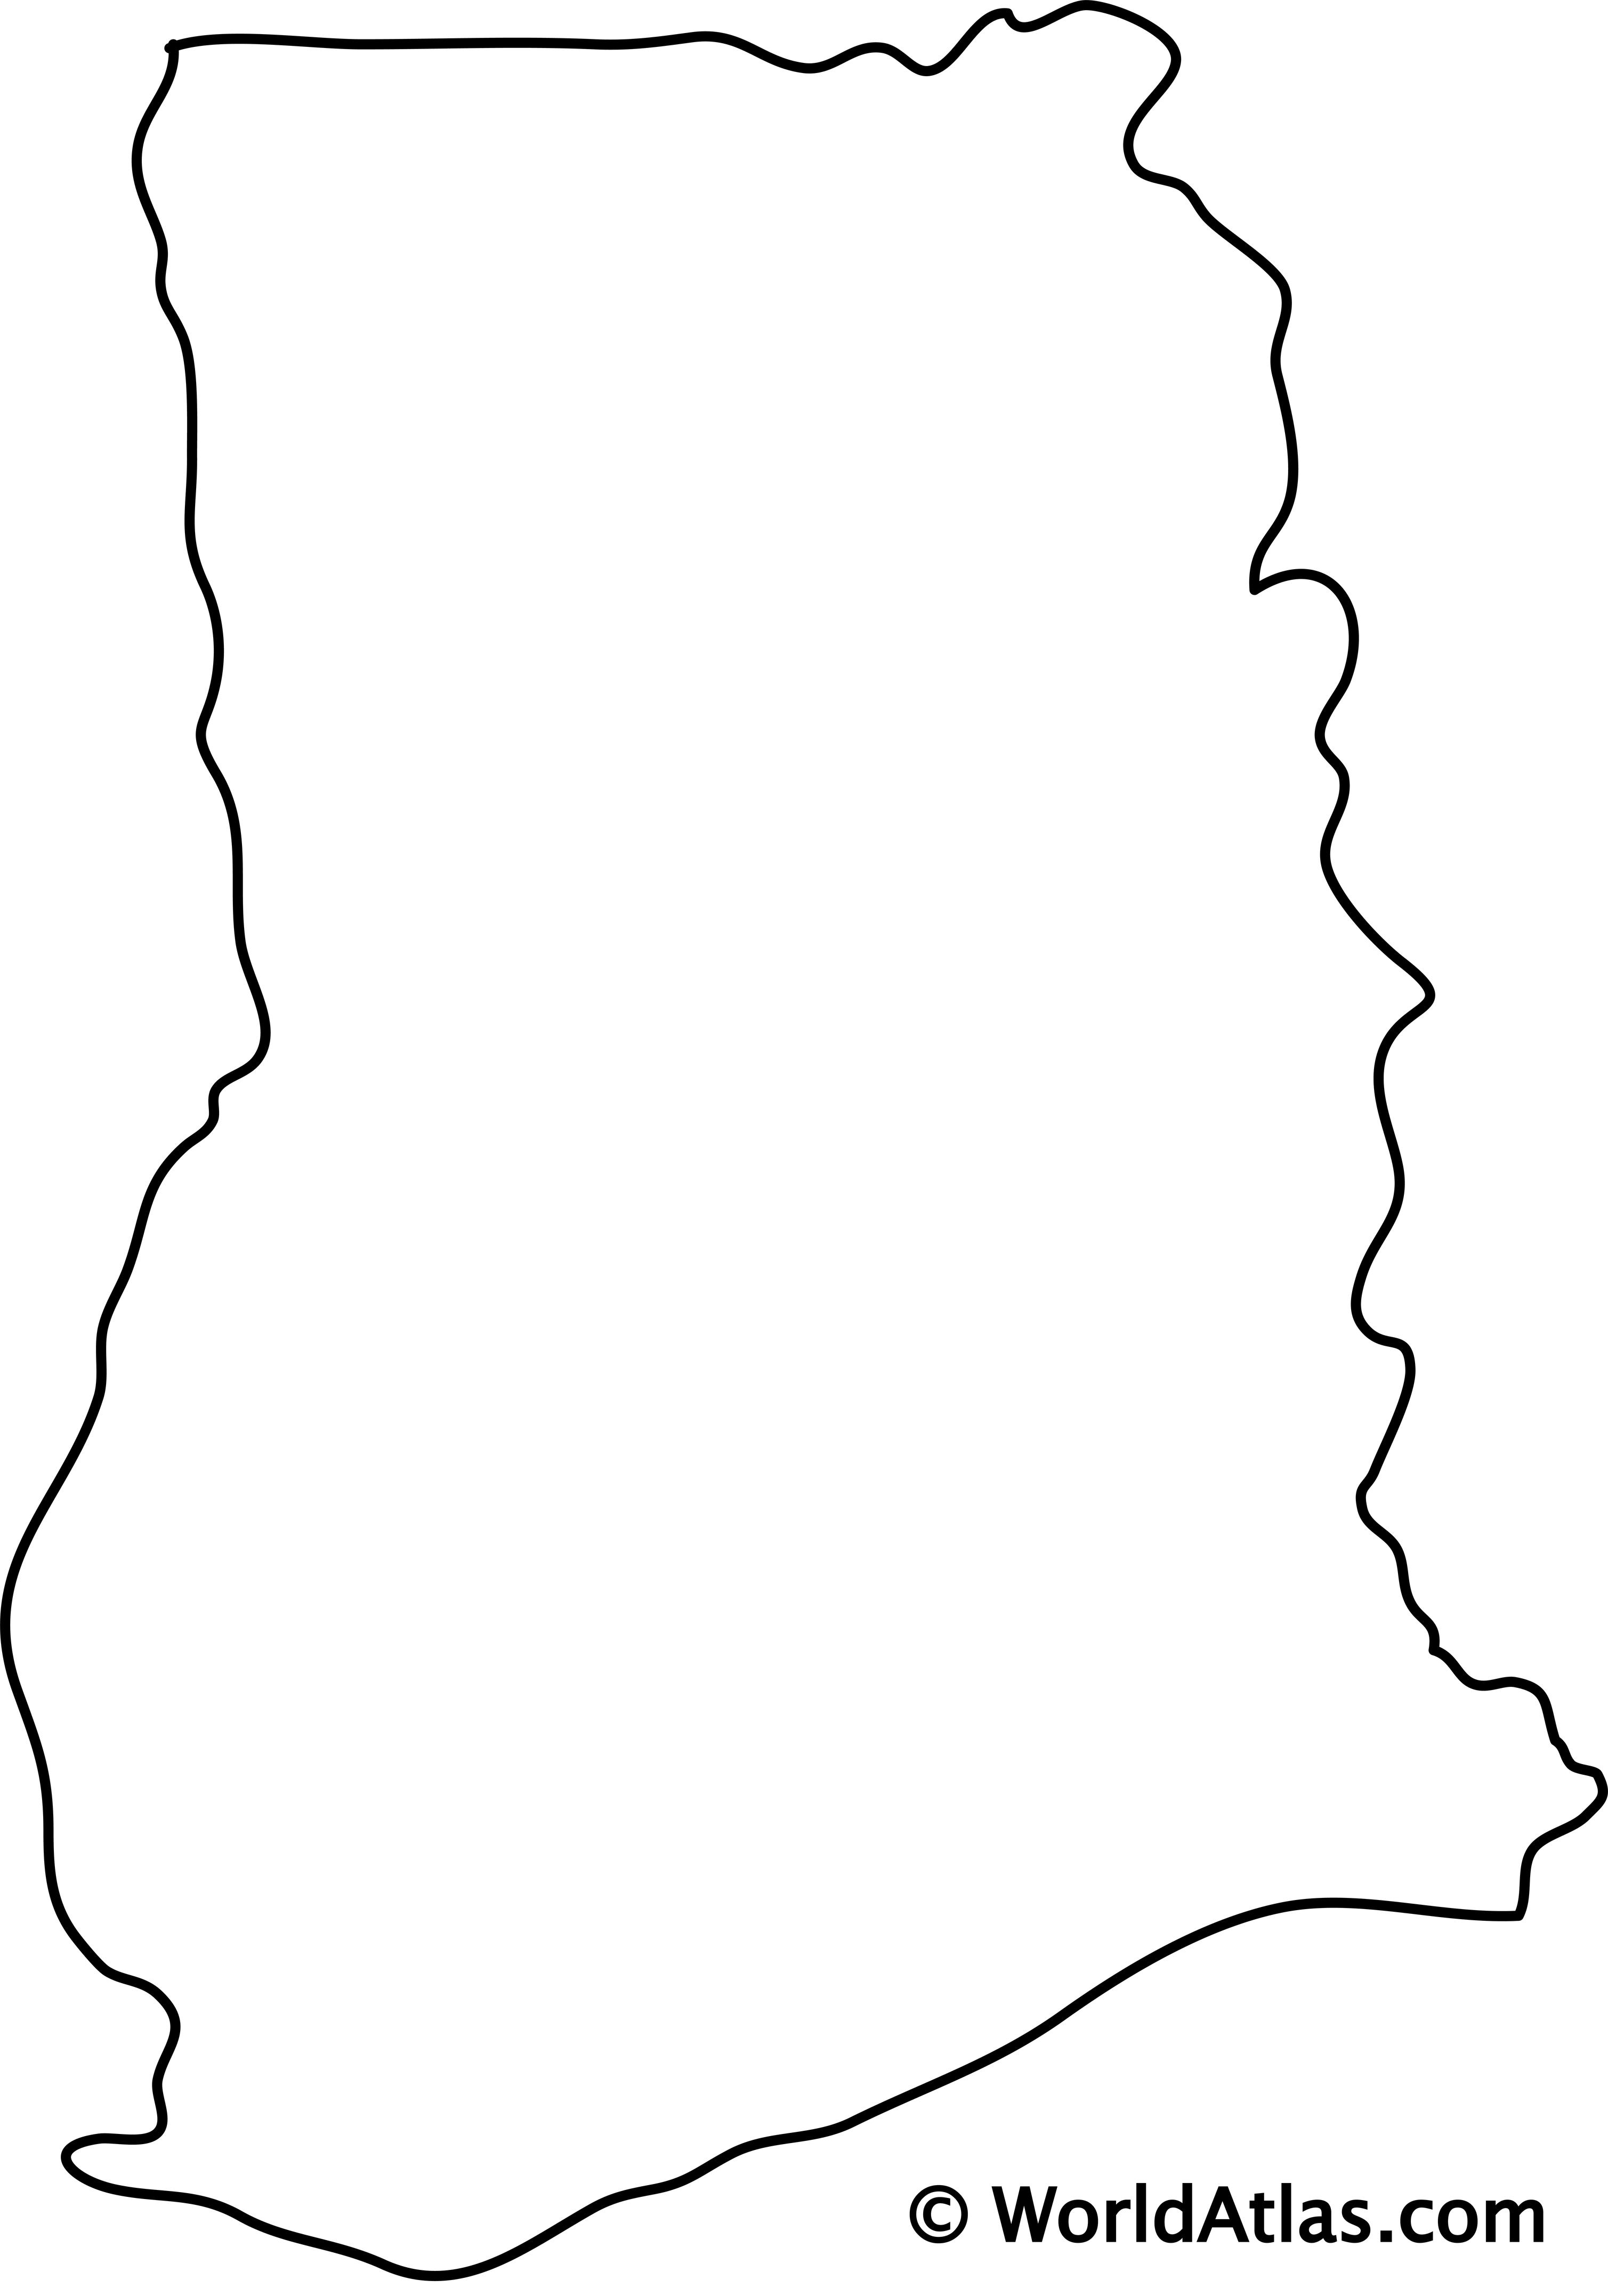 the world map outline. print this Outline Map of